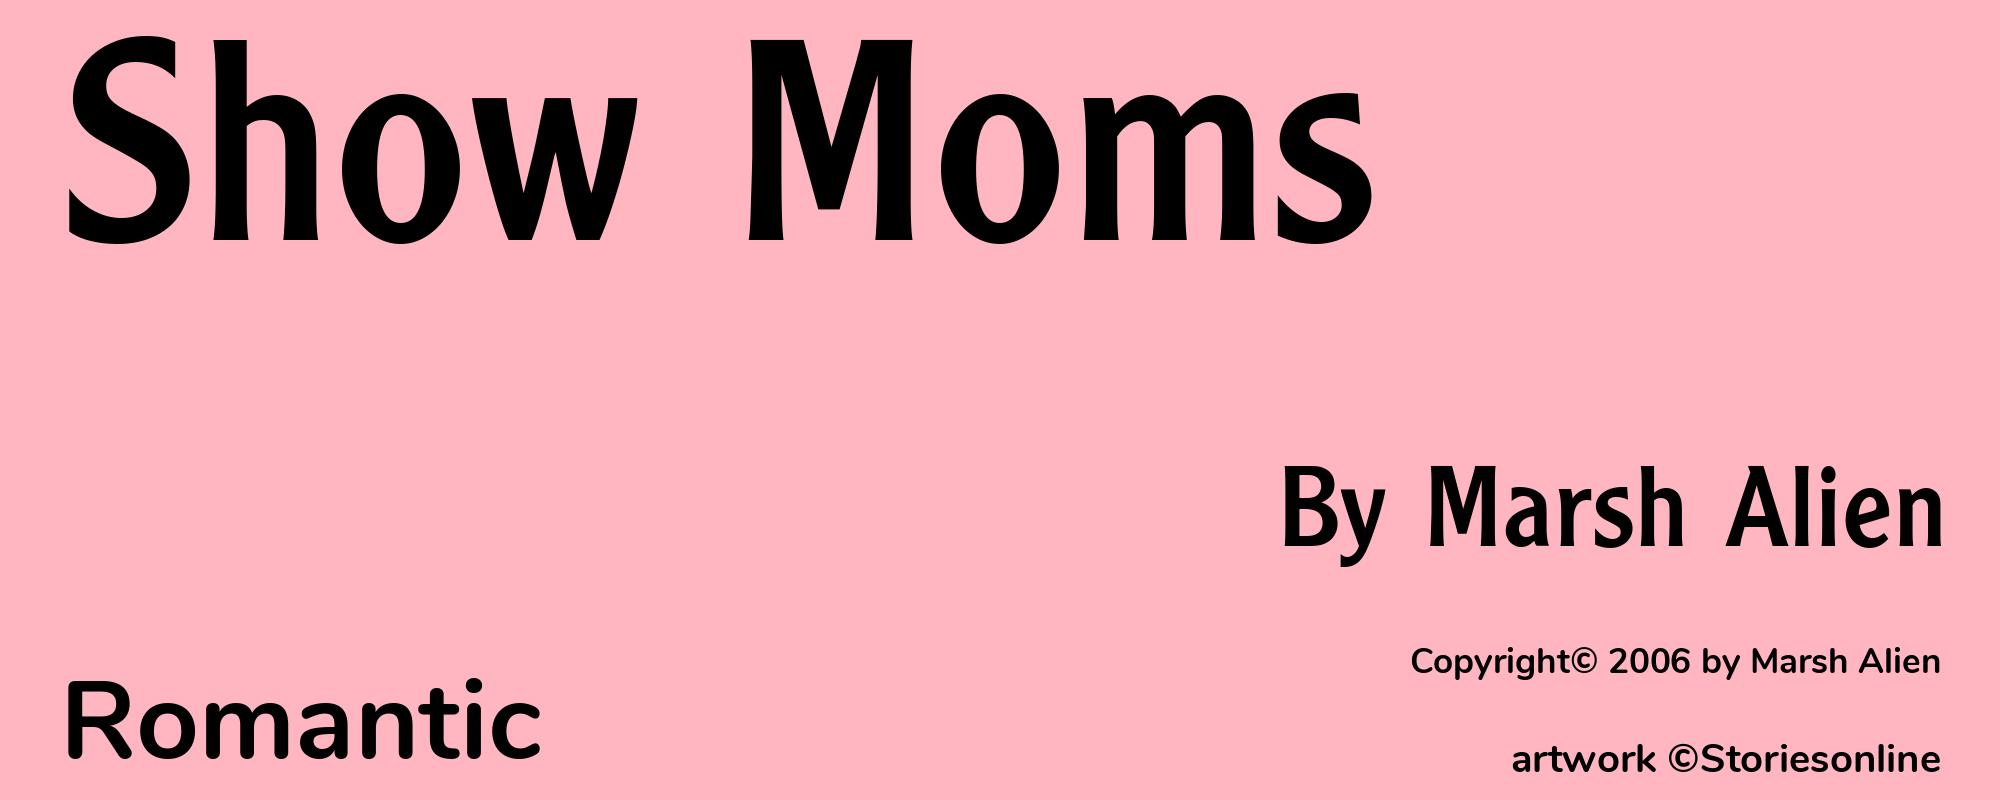 Show Moms - Cover